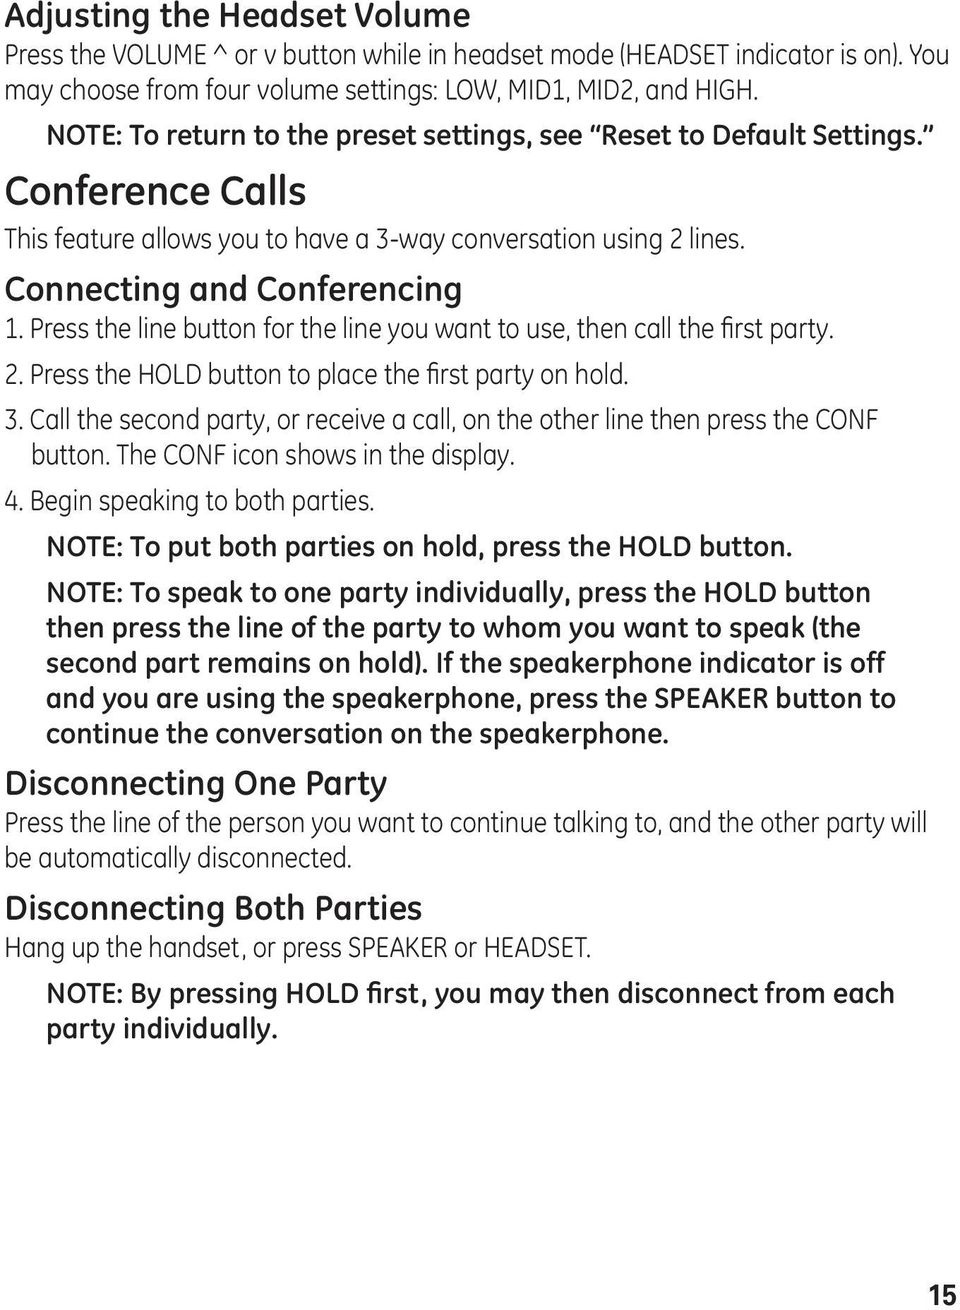 Press the line button for the line you want to use, then call the first party. 2. Press the HOLD button to place the first party on hold. 3.